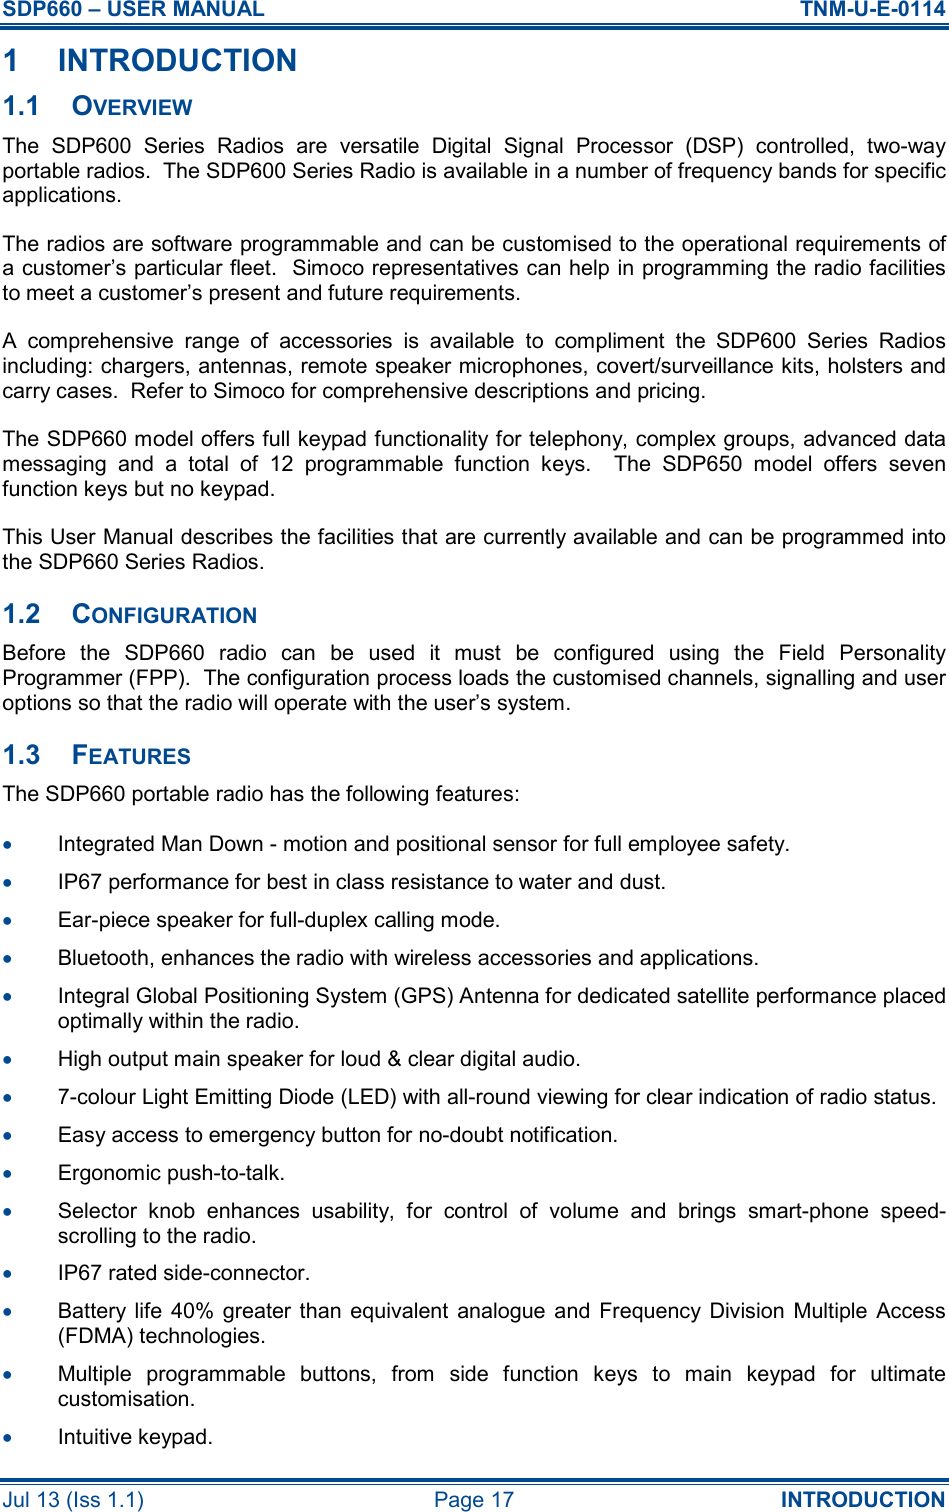 SDP660 – USER MANUAL  TNM-U-E-0114 Jul 13 (Iss 1.1)  Page 17  INTRODUCTION 1  INTRODUCTION 1.1  OVERVIEW The  SDP600  Series  Radios  are  versatile  Digital  Signal  Processor  (DSP)  controlled,  two-way portable radios.  The SDP600 Series Radio is available in a number of frequency bands for specific applications. The radios are software programmable and can be customised to the operational requirements of a customer’s particular fleet.  Simoco representatives can help in programming the radio facilities to meet a customer’s present and future requirements. A  comprehensive  range  of  accessories  is  available  to  compliment  the  SDP600  Series  Radios including: chargers, antennas, remote speaker microphones, covert/surveillance kits, holsters and carry cases.  Refer to Simoco for comprehensive descriptions and pricing. The SDP660 model offers full keypad functionality for telephony, complex groups, advanced data messaging  and  a  total  of  12  programmable  function  keys.    The  SDP650  model  offers  seven function keys but no keypad. This User Manual describes the facilities that are currently available and can be programmed into the SDP660 Series Radios. 1.2  CONFIGURATION Before  the  SDP660  radio  can  be  used  it  must  be  configured  using  the  Field  Personality Programmer (FPP).  The configuration process loads the customised channels, signalling and user options so that the radio will operate with the user’s system. 1.3  FEATURES The SDP660 portable radio has the following features: •  Integrated Man Down - motion and positional sensor for full employee safety. •  IP67 performance for best in class resistance to water and dust. •  Ear-piece speaker for full-duplex calling mode. •  Bluetooth, enhances the radio with wireless accessories and applications. •  Integral Global Positioning System (GPS) Antenna for dedicated satellite performance placed optimally within the radio. •  High output main speaker for loud &amp; clear digital audio. •  7-colour Light Emitting Diode (LED) with all-round viewing for clear indication of radio status. •  Easy access to emergency button for no-doubt notification. •  Ergonomic push-to-talk. •  Selector  knob  enhances  usability,  for  control  of  volume  and  brings  smart-phone  speed-scrolling to the radio. •  IP67 rated side-connector. •  Battery life  40%  greater  than equivalent  analogue  and  Frequency  Division  Multiple  Access (FDMA) technologies. •  Multiple  programmable  buttons,  from  side  function  keys  to  main  keypad  for  ultimate customisation. •  Intuitive keypad. 